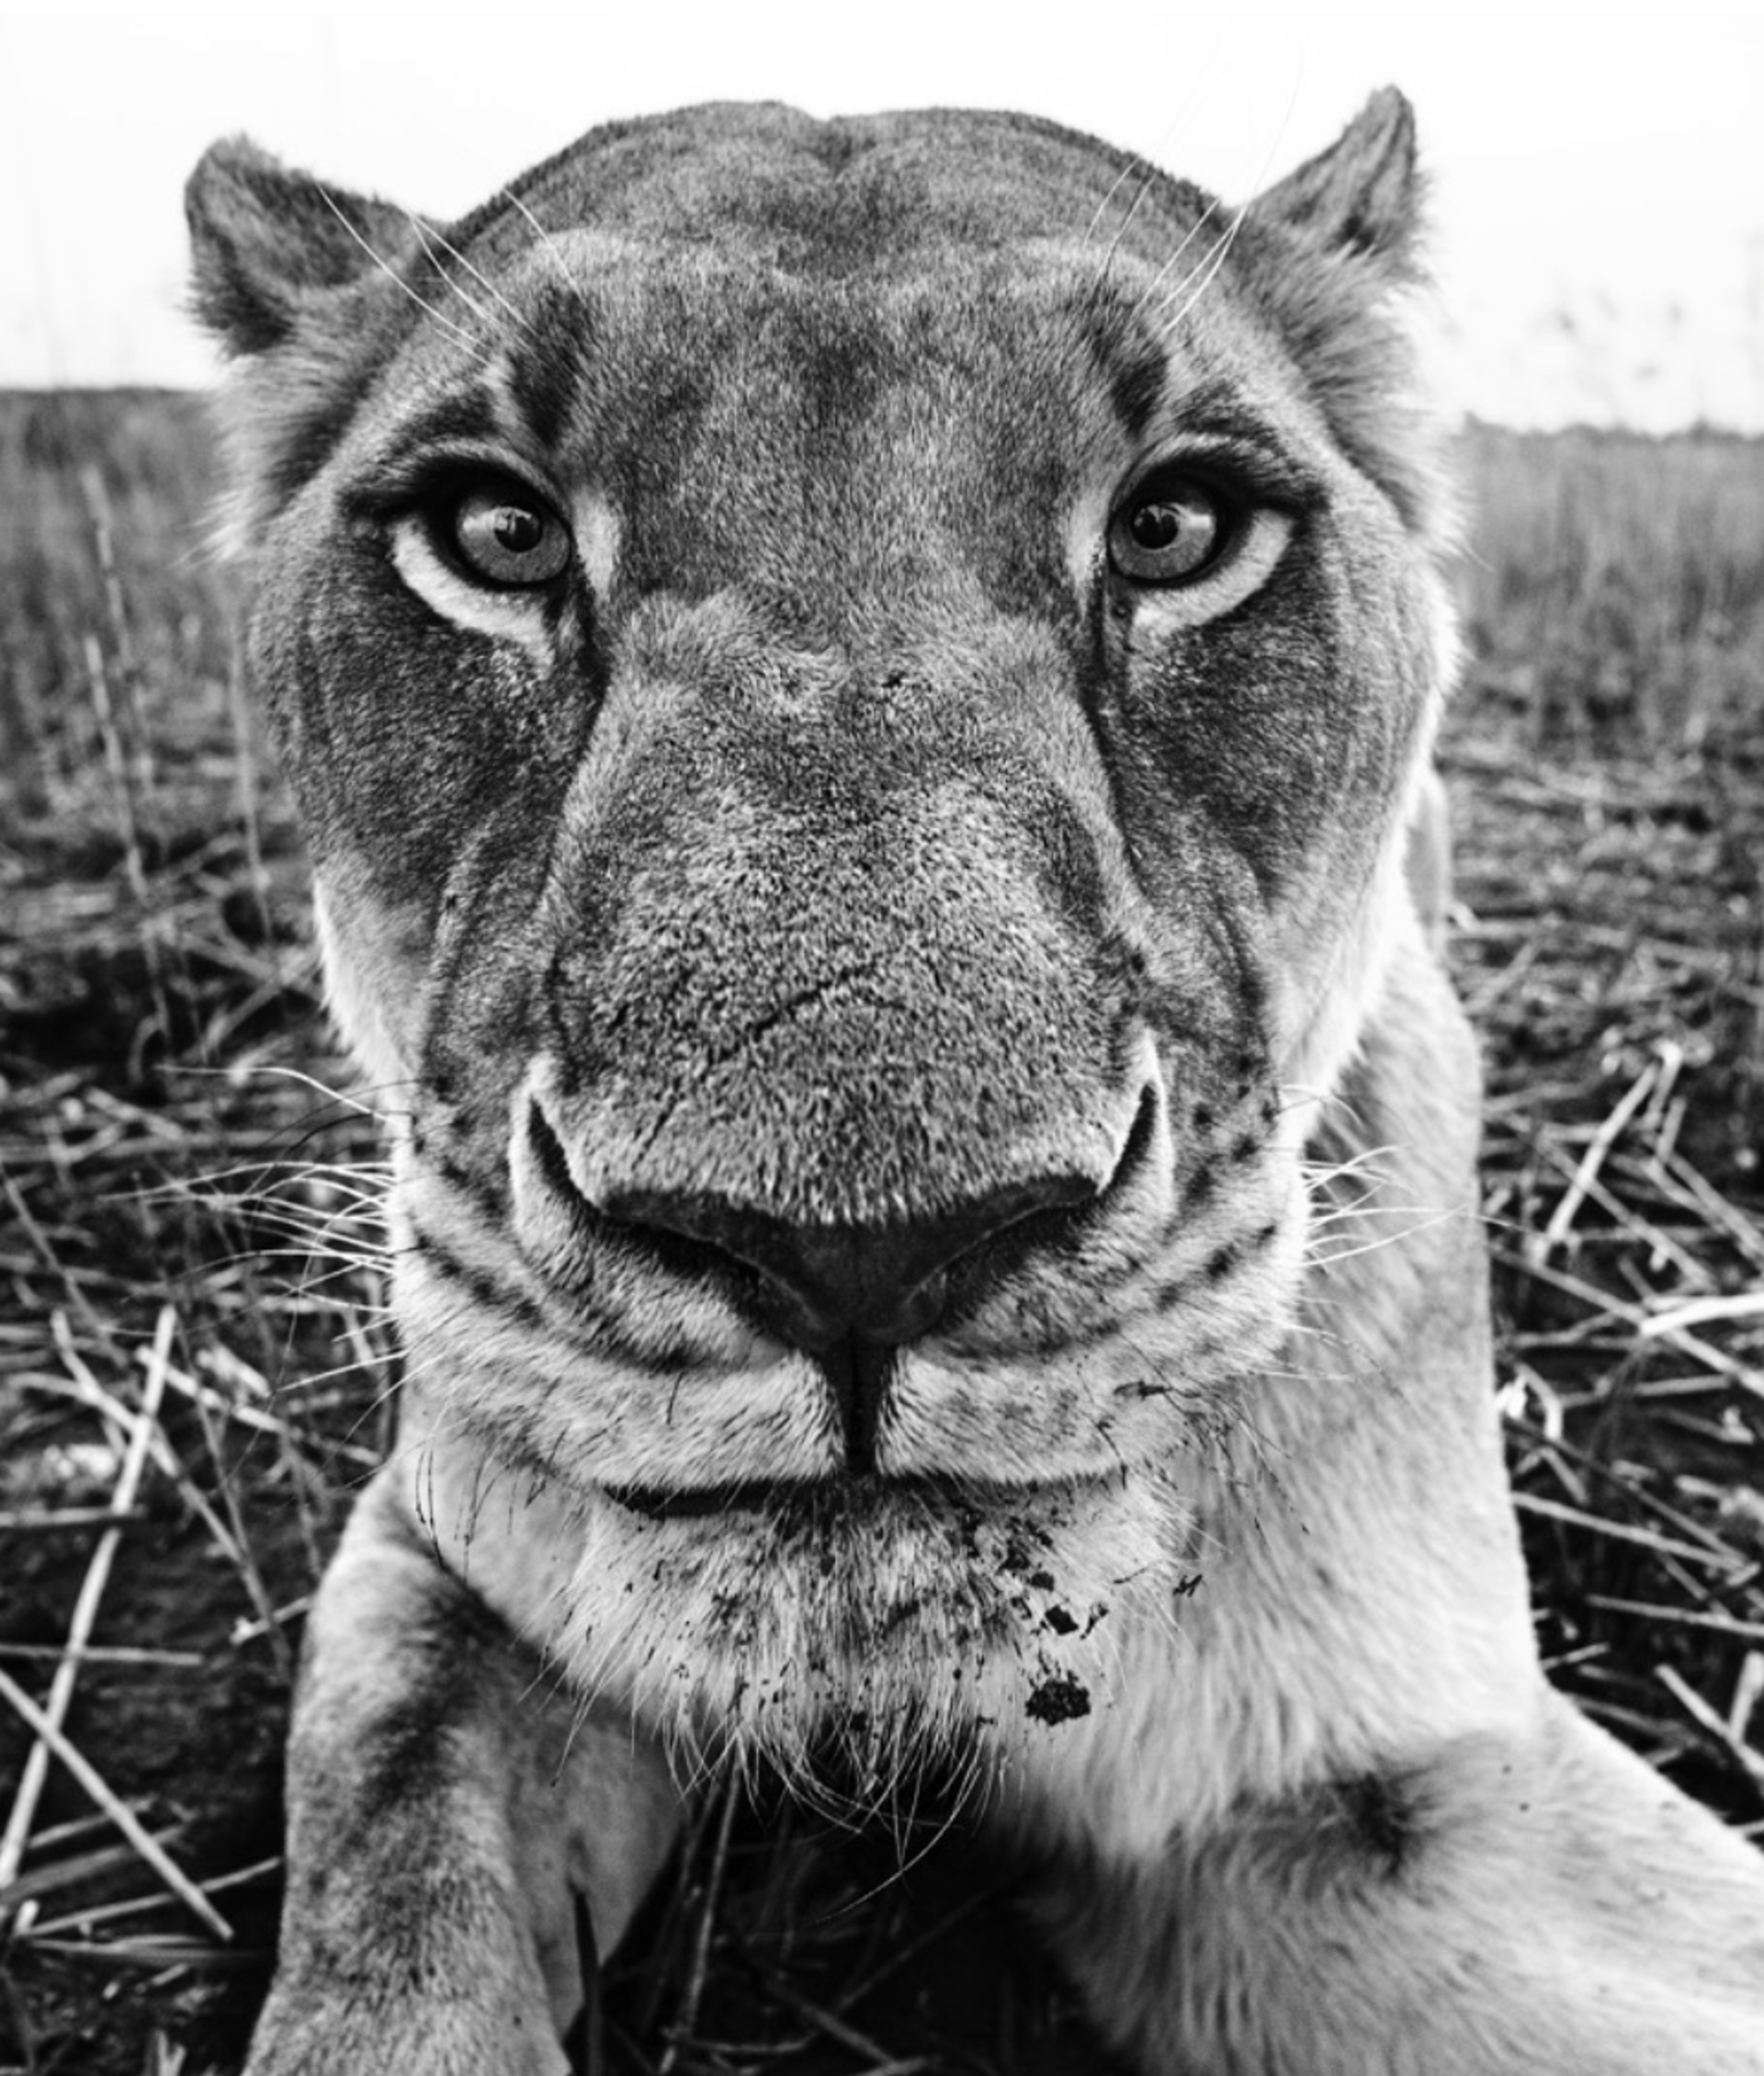 The Hunger Games by David Yarrow